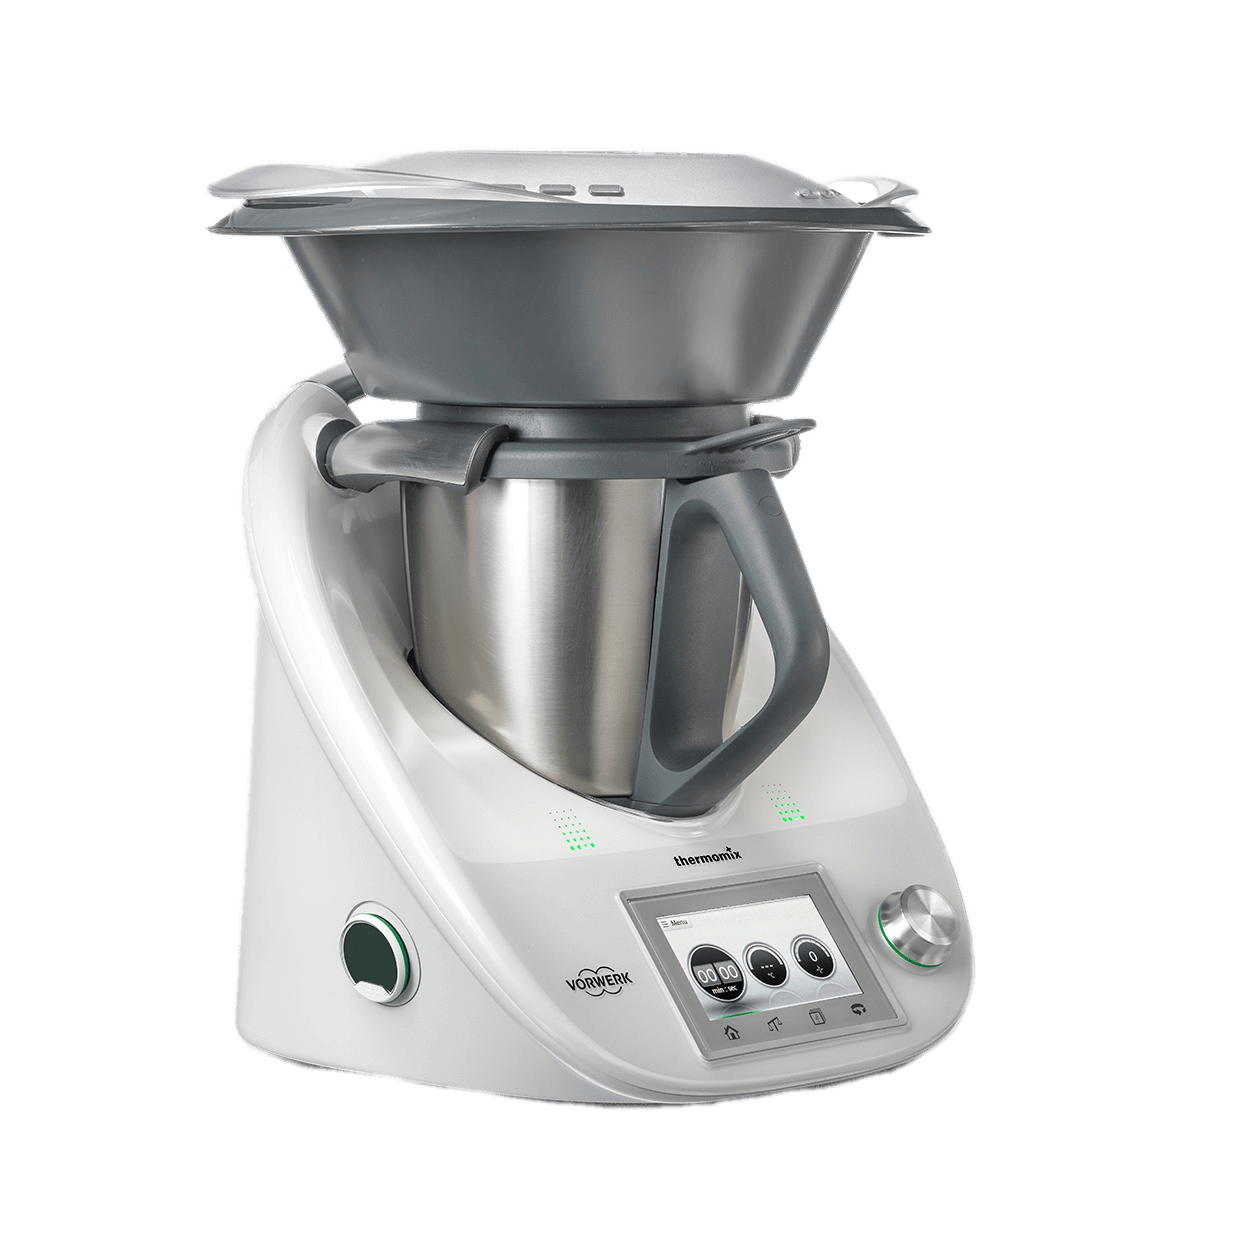 Thermomix With Varoma Tray SVG Clip arts